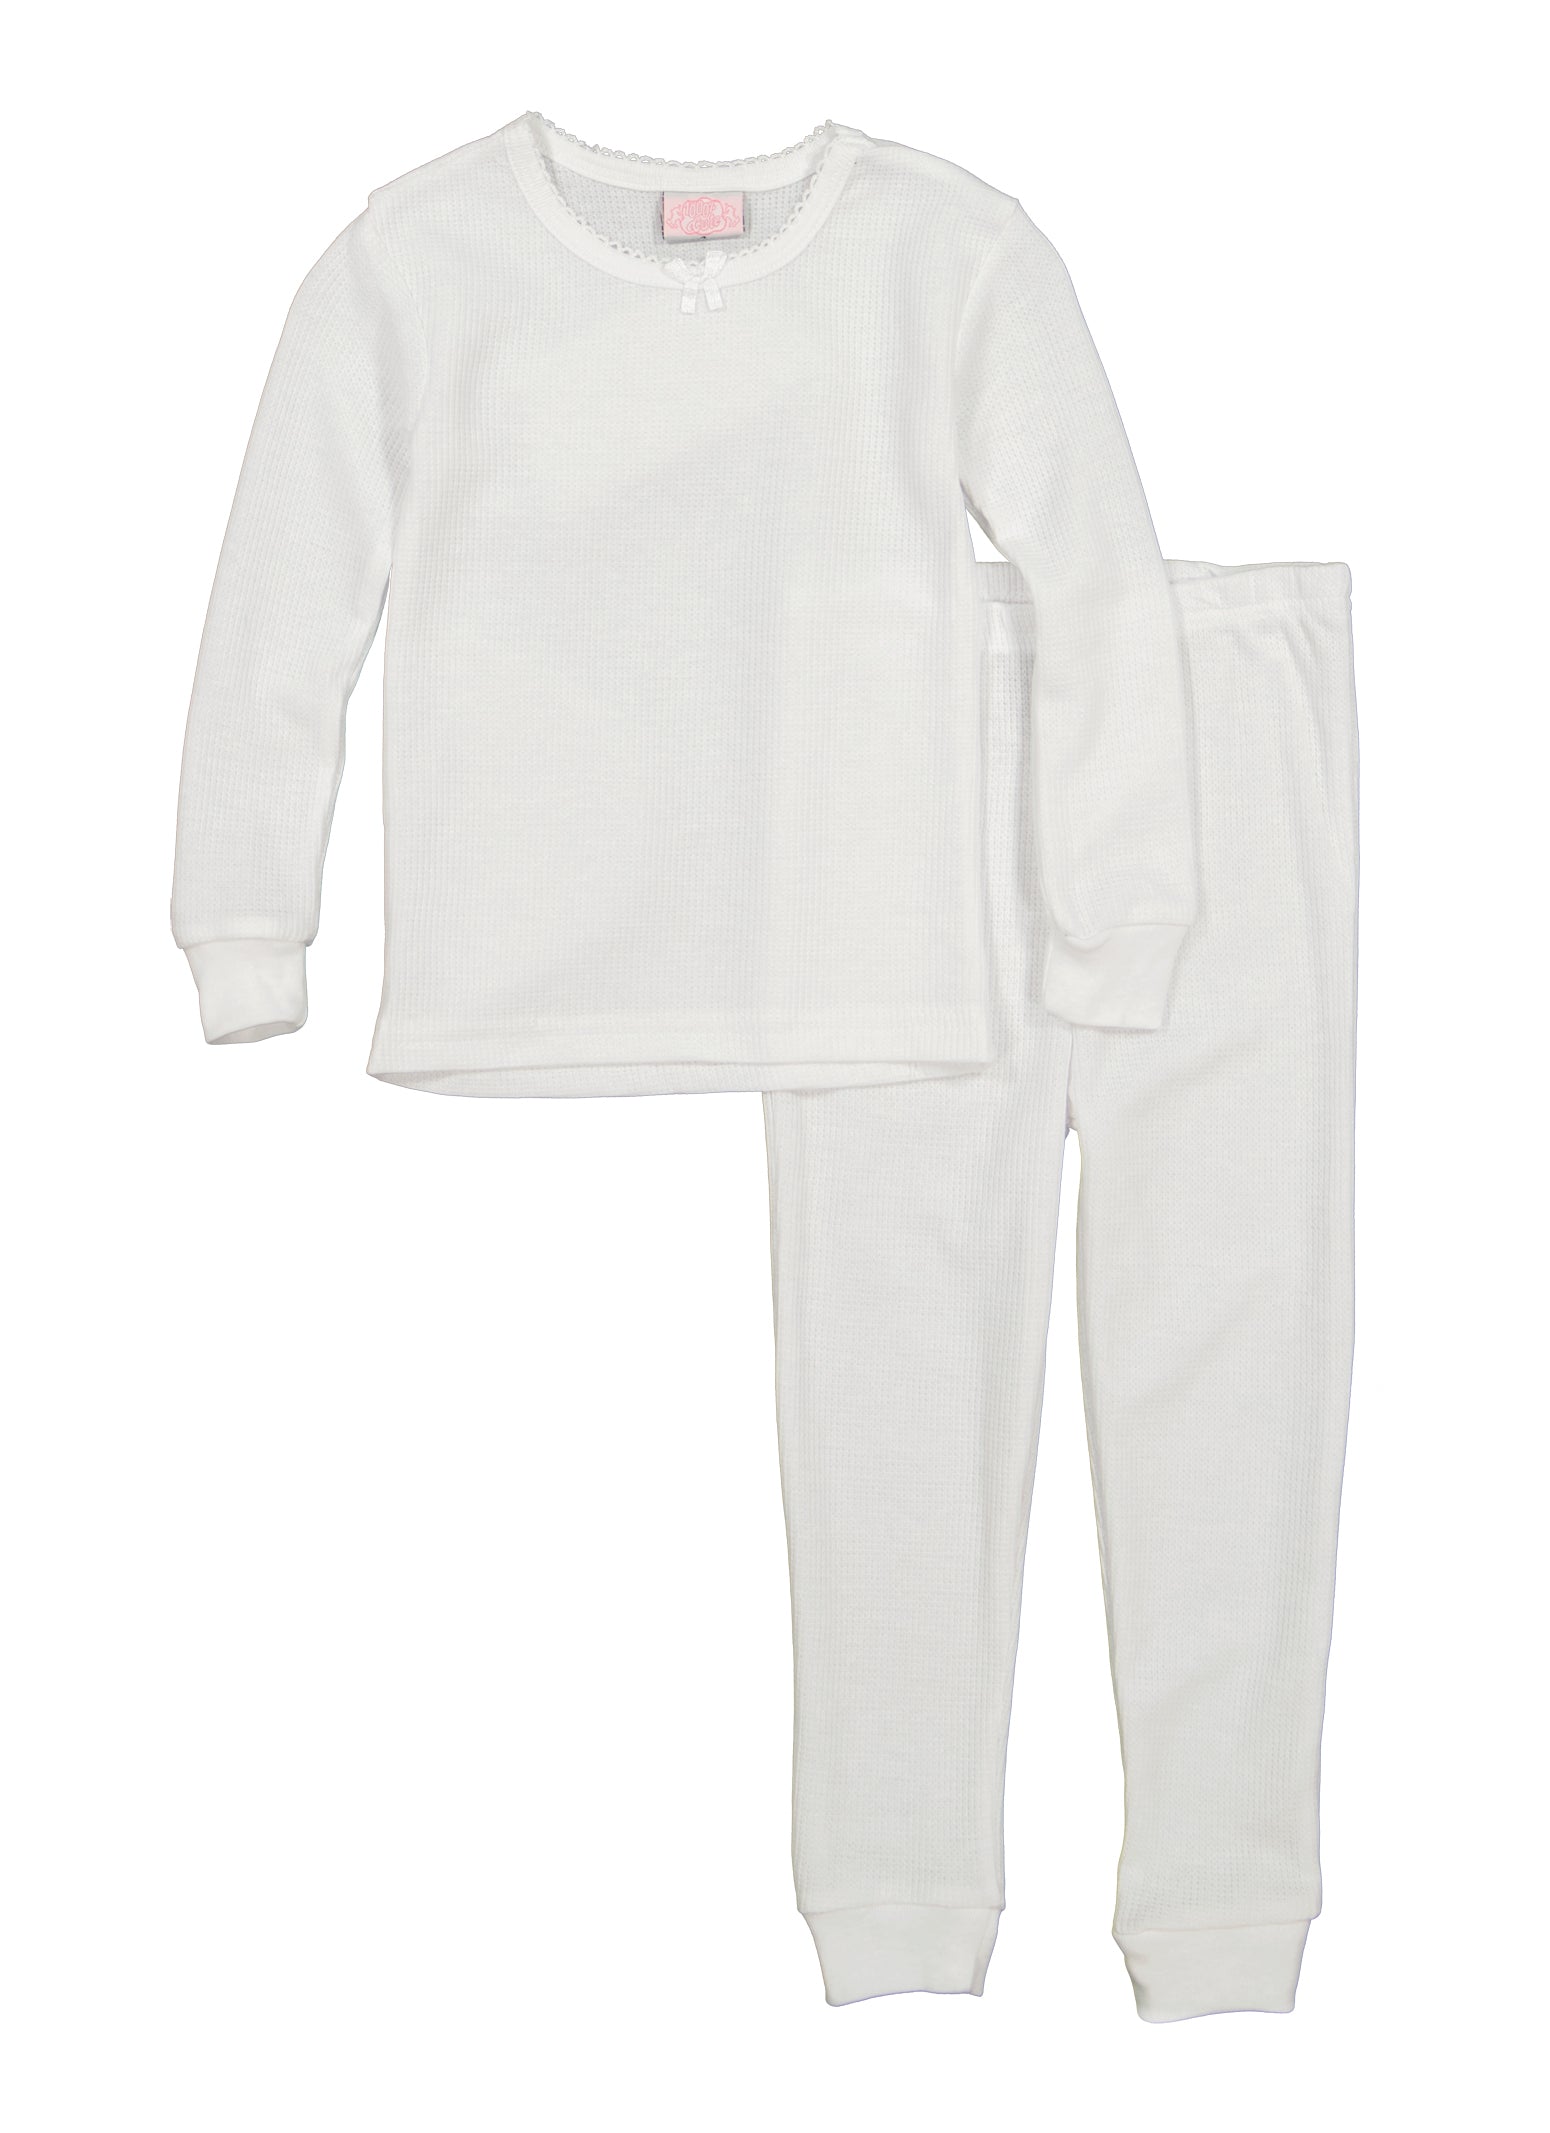 Rainbow Shops Womens Girls Thermal Pajama Top and Pants, White, Size 4